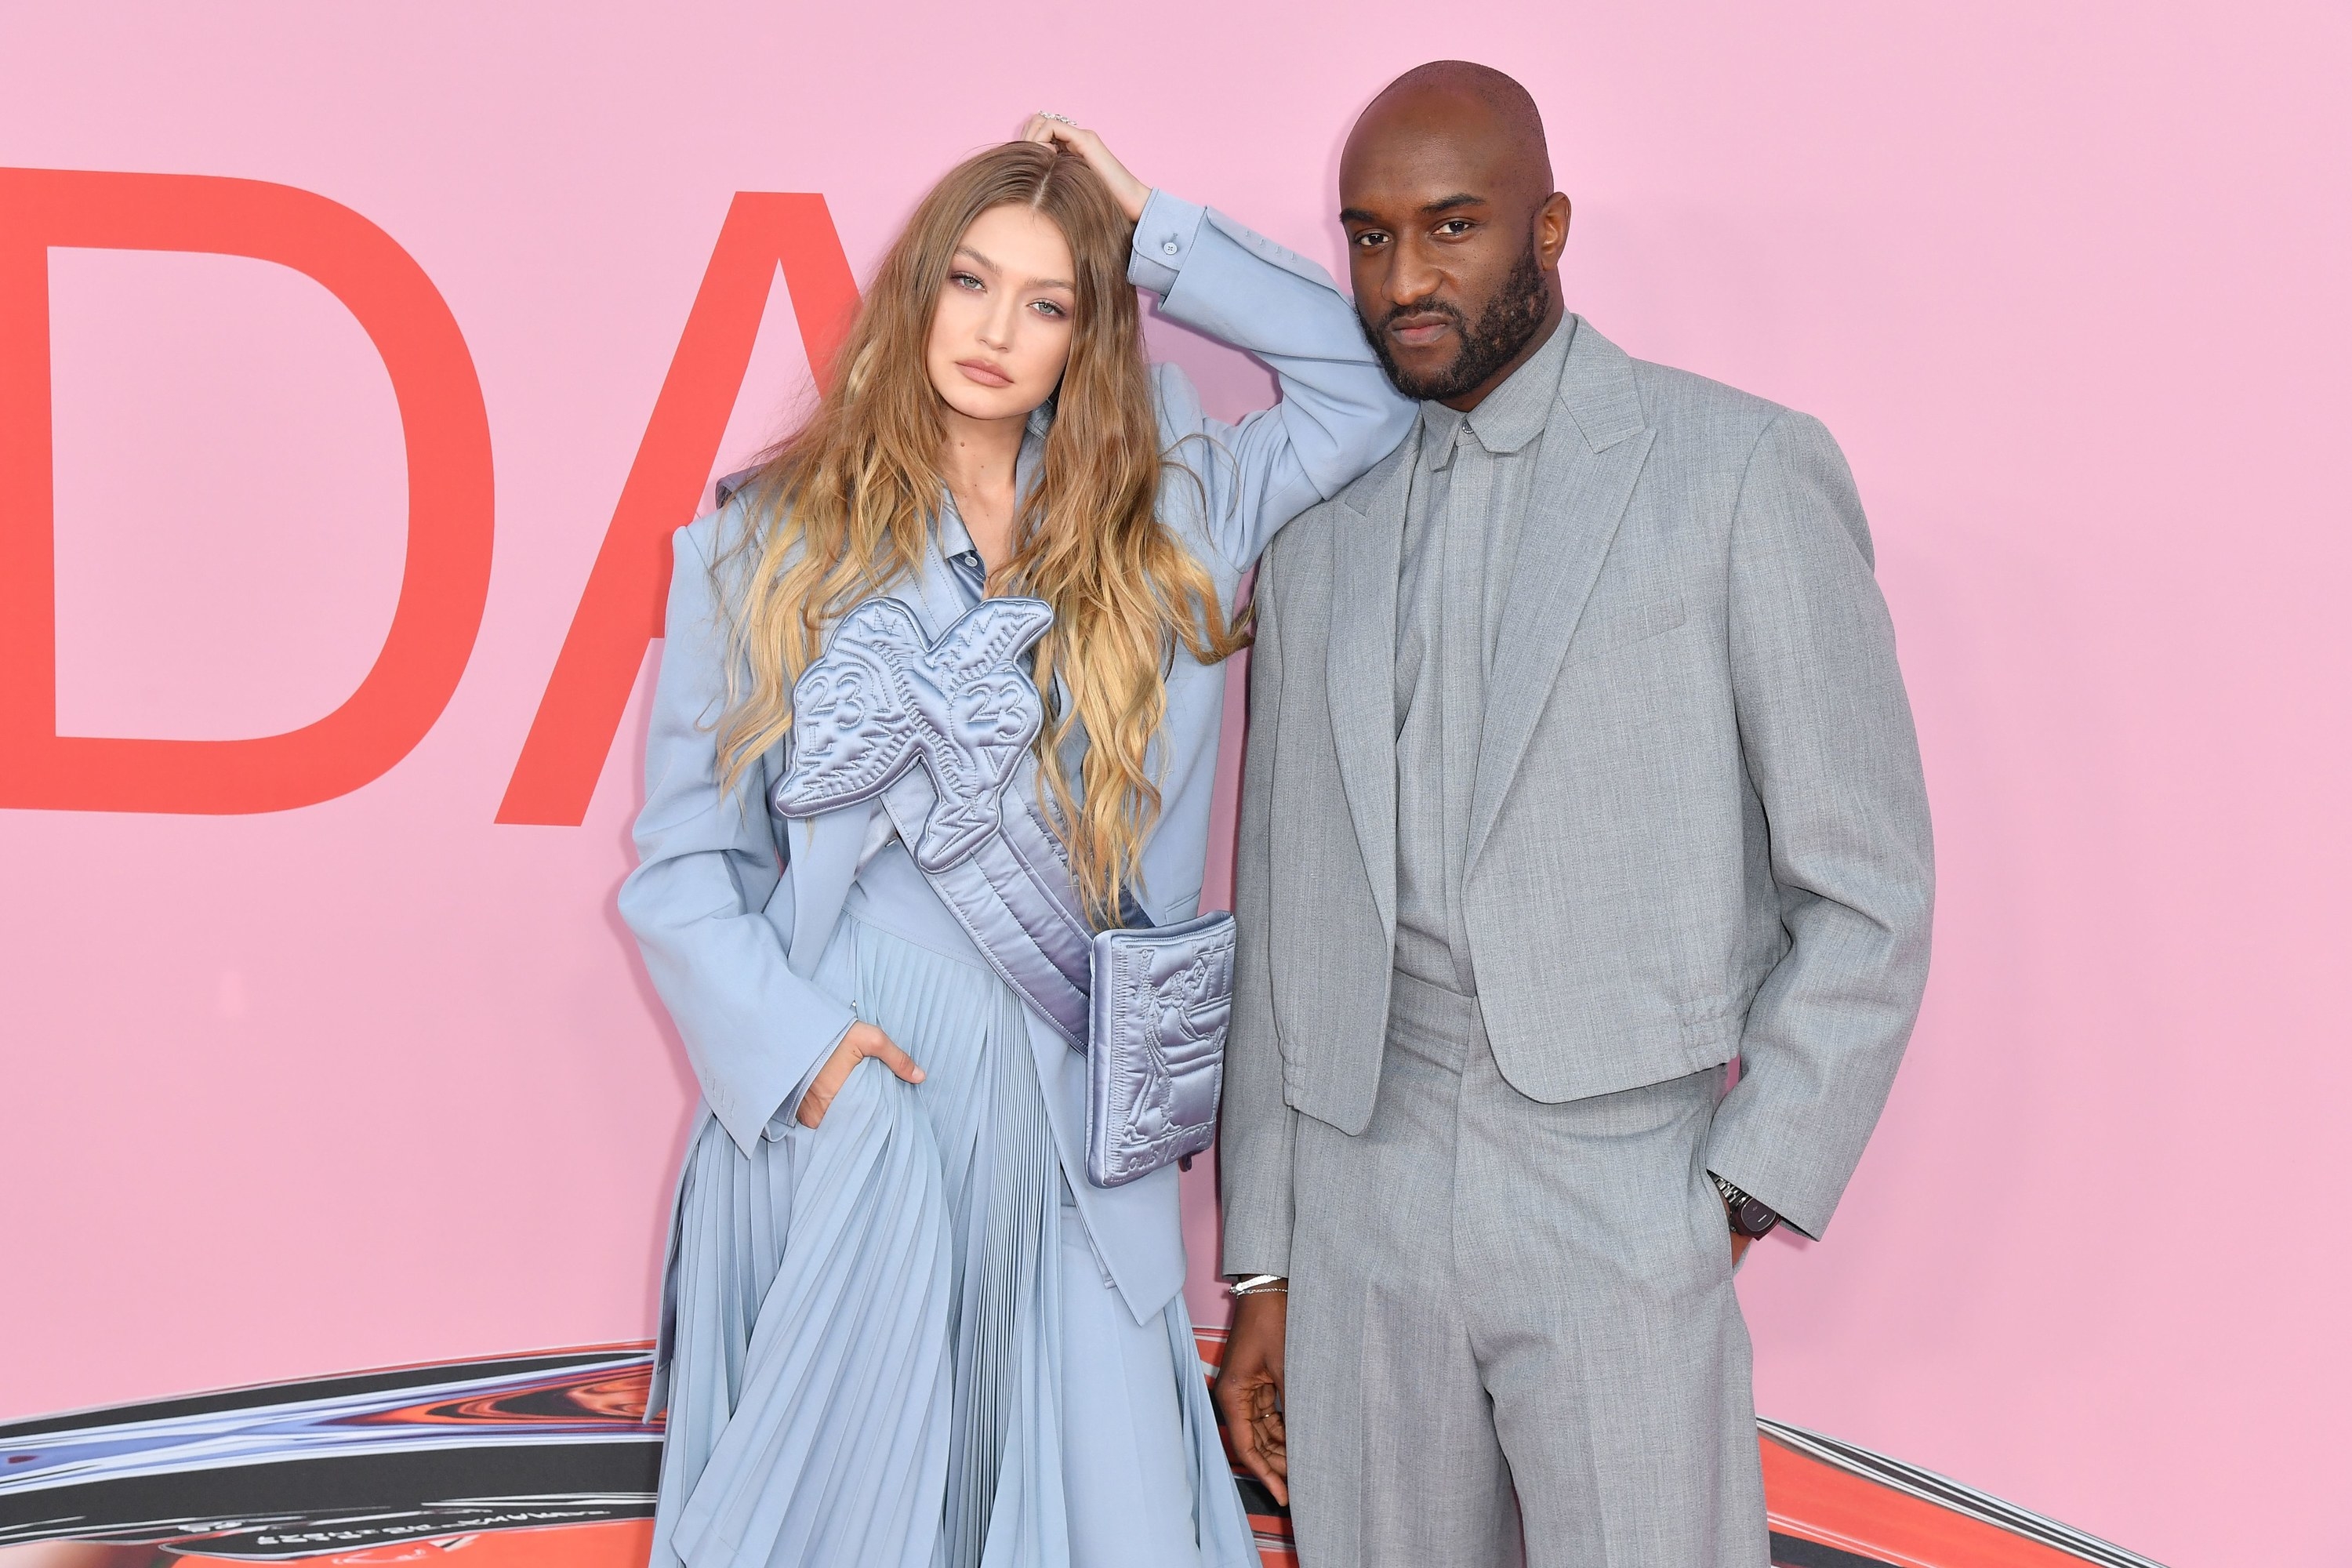 Gigi Hadid and Virgil Abloh at the 2019 CFDA fashion awards at the Brooklyn Museum in New York City on June 3, 2019.